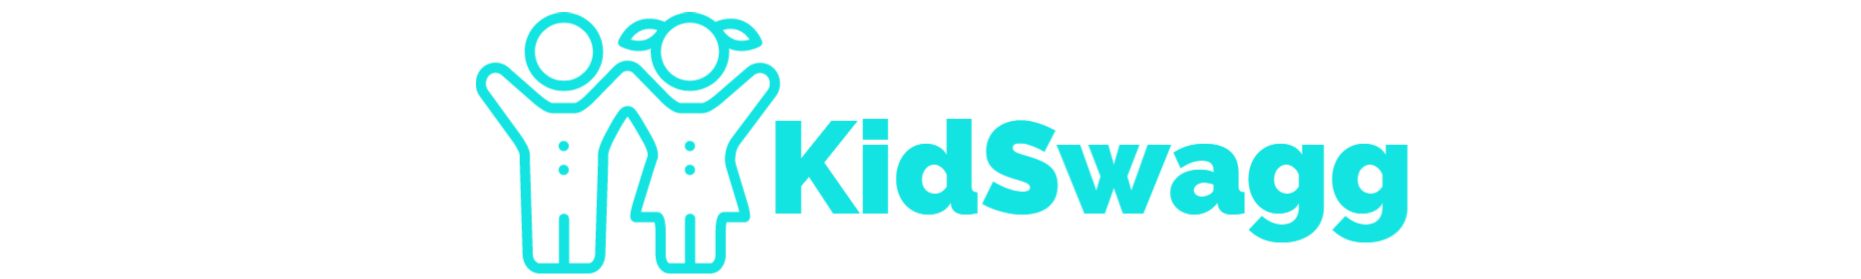 10% Off With Kidswagg Coupon Code